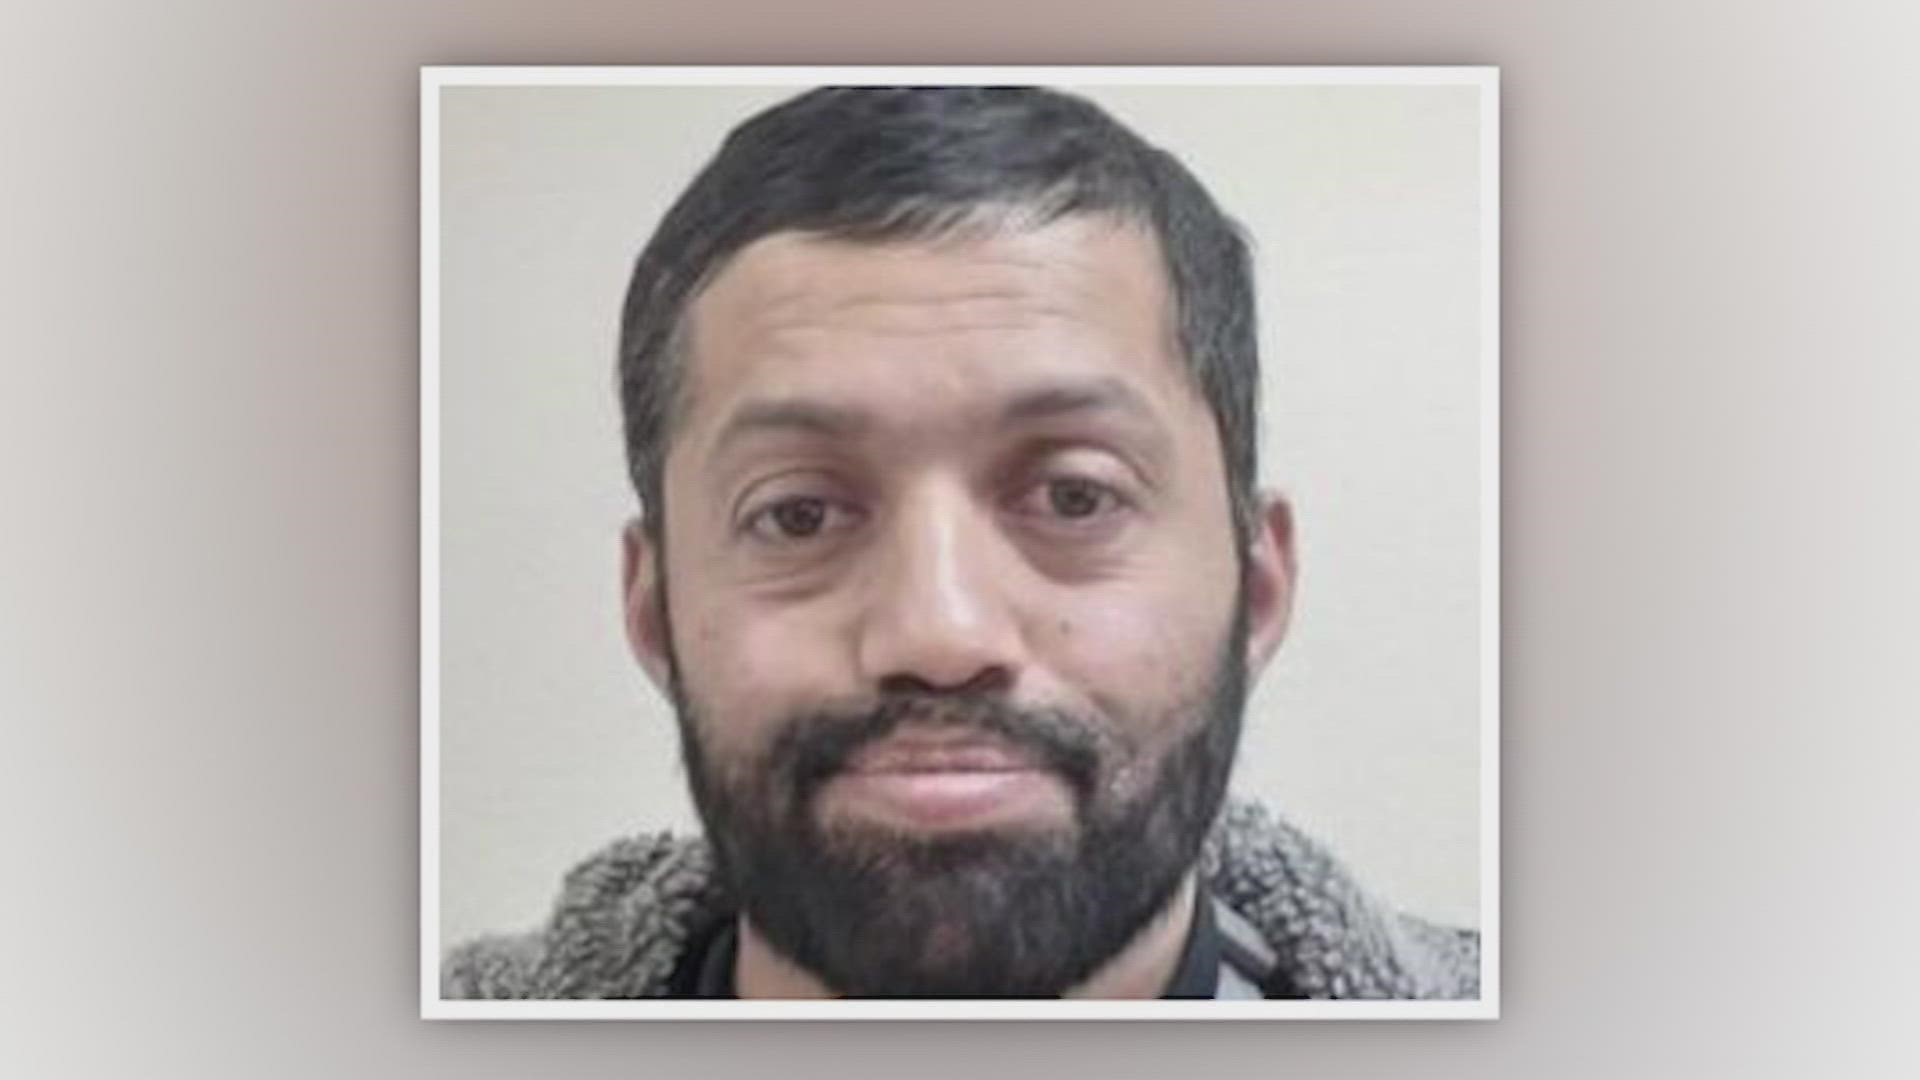 Authorities in the U.S. and the UK are sharing details about Malik Faisal Akram's arrival to Texas.